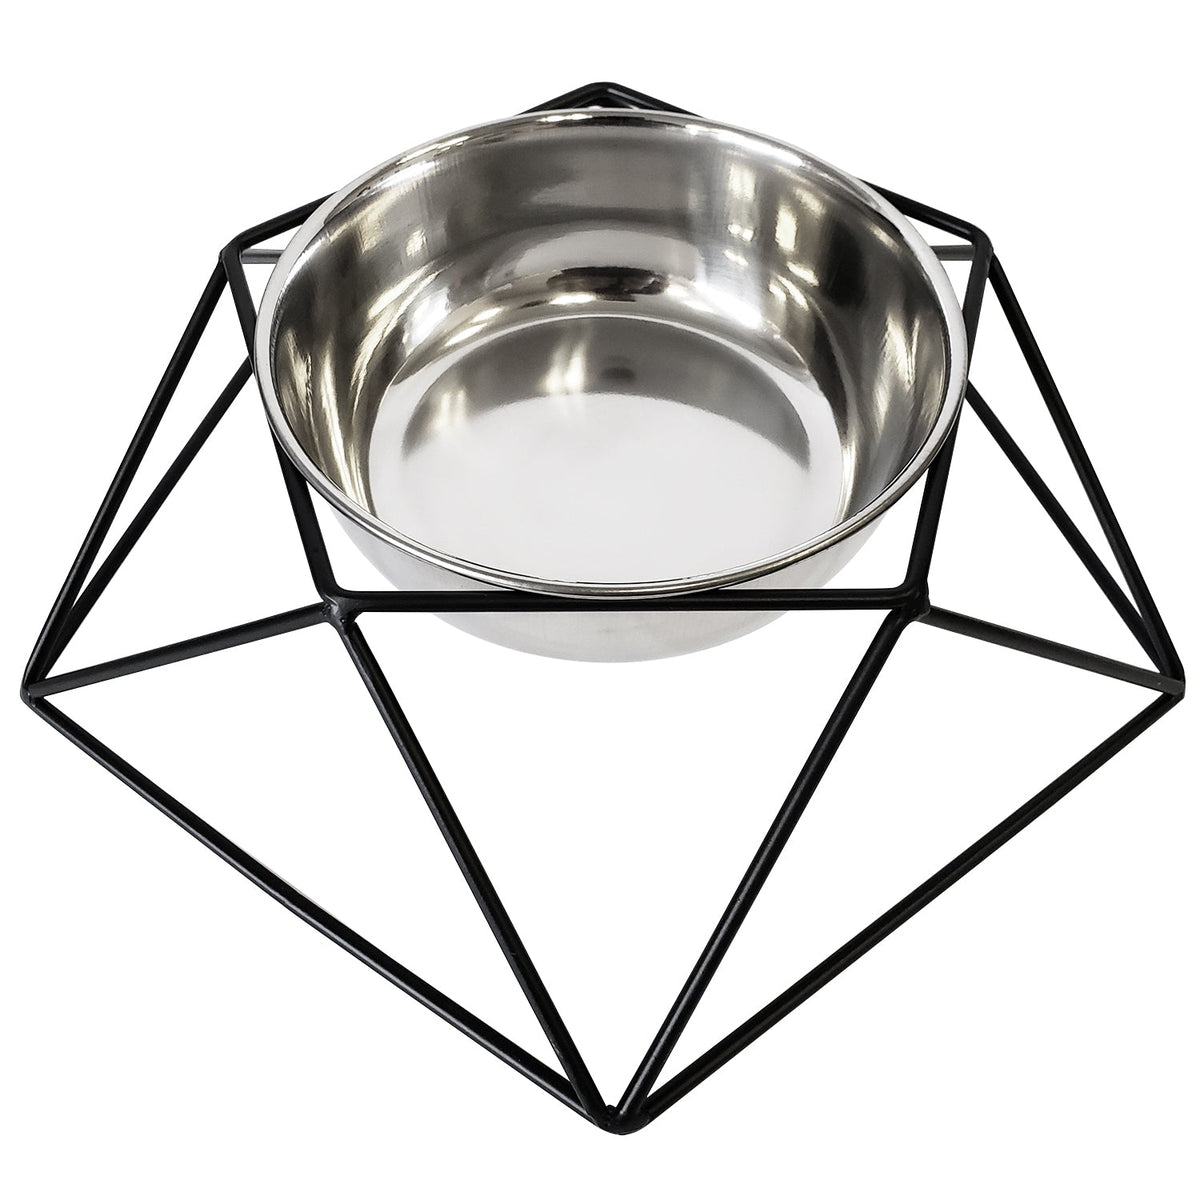 Modern Hexagonal Black Geometric Dog Feeder with Stainless Steel Bowl by American Pet Supplies